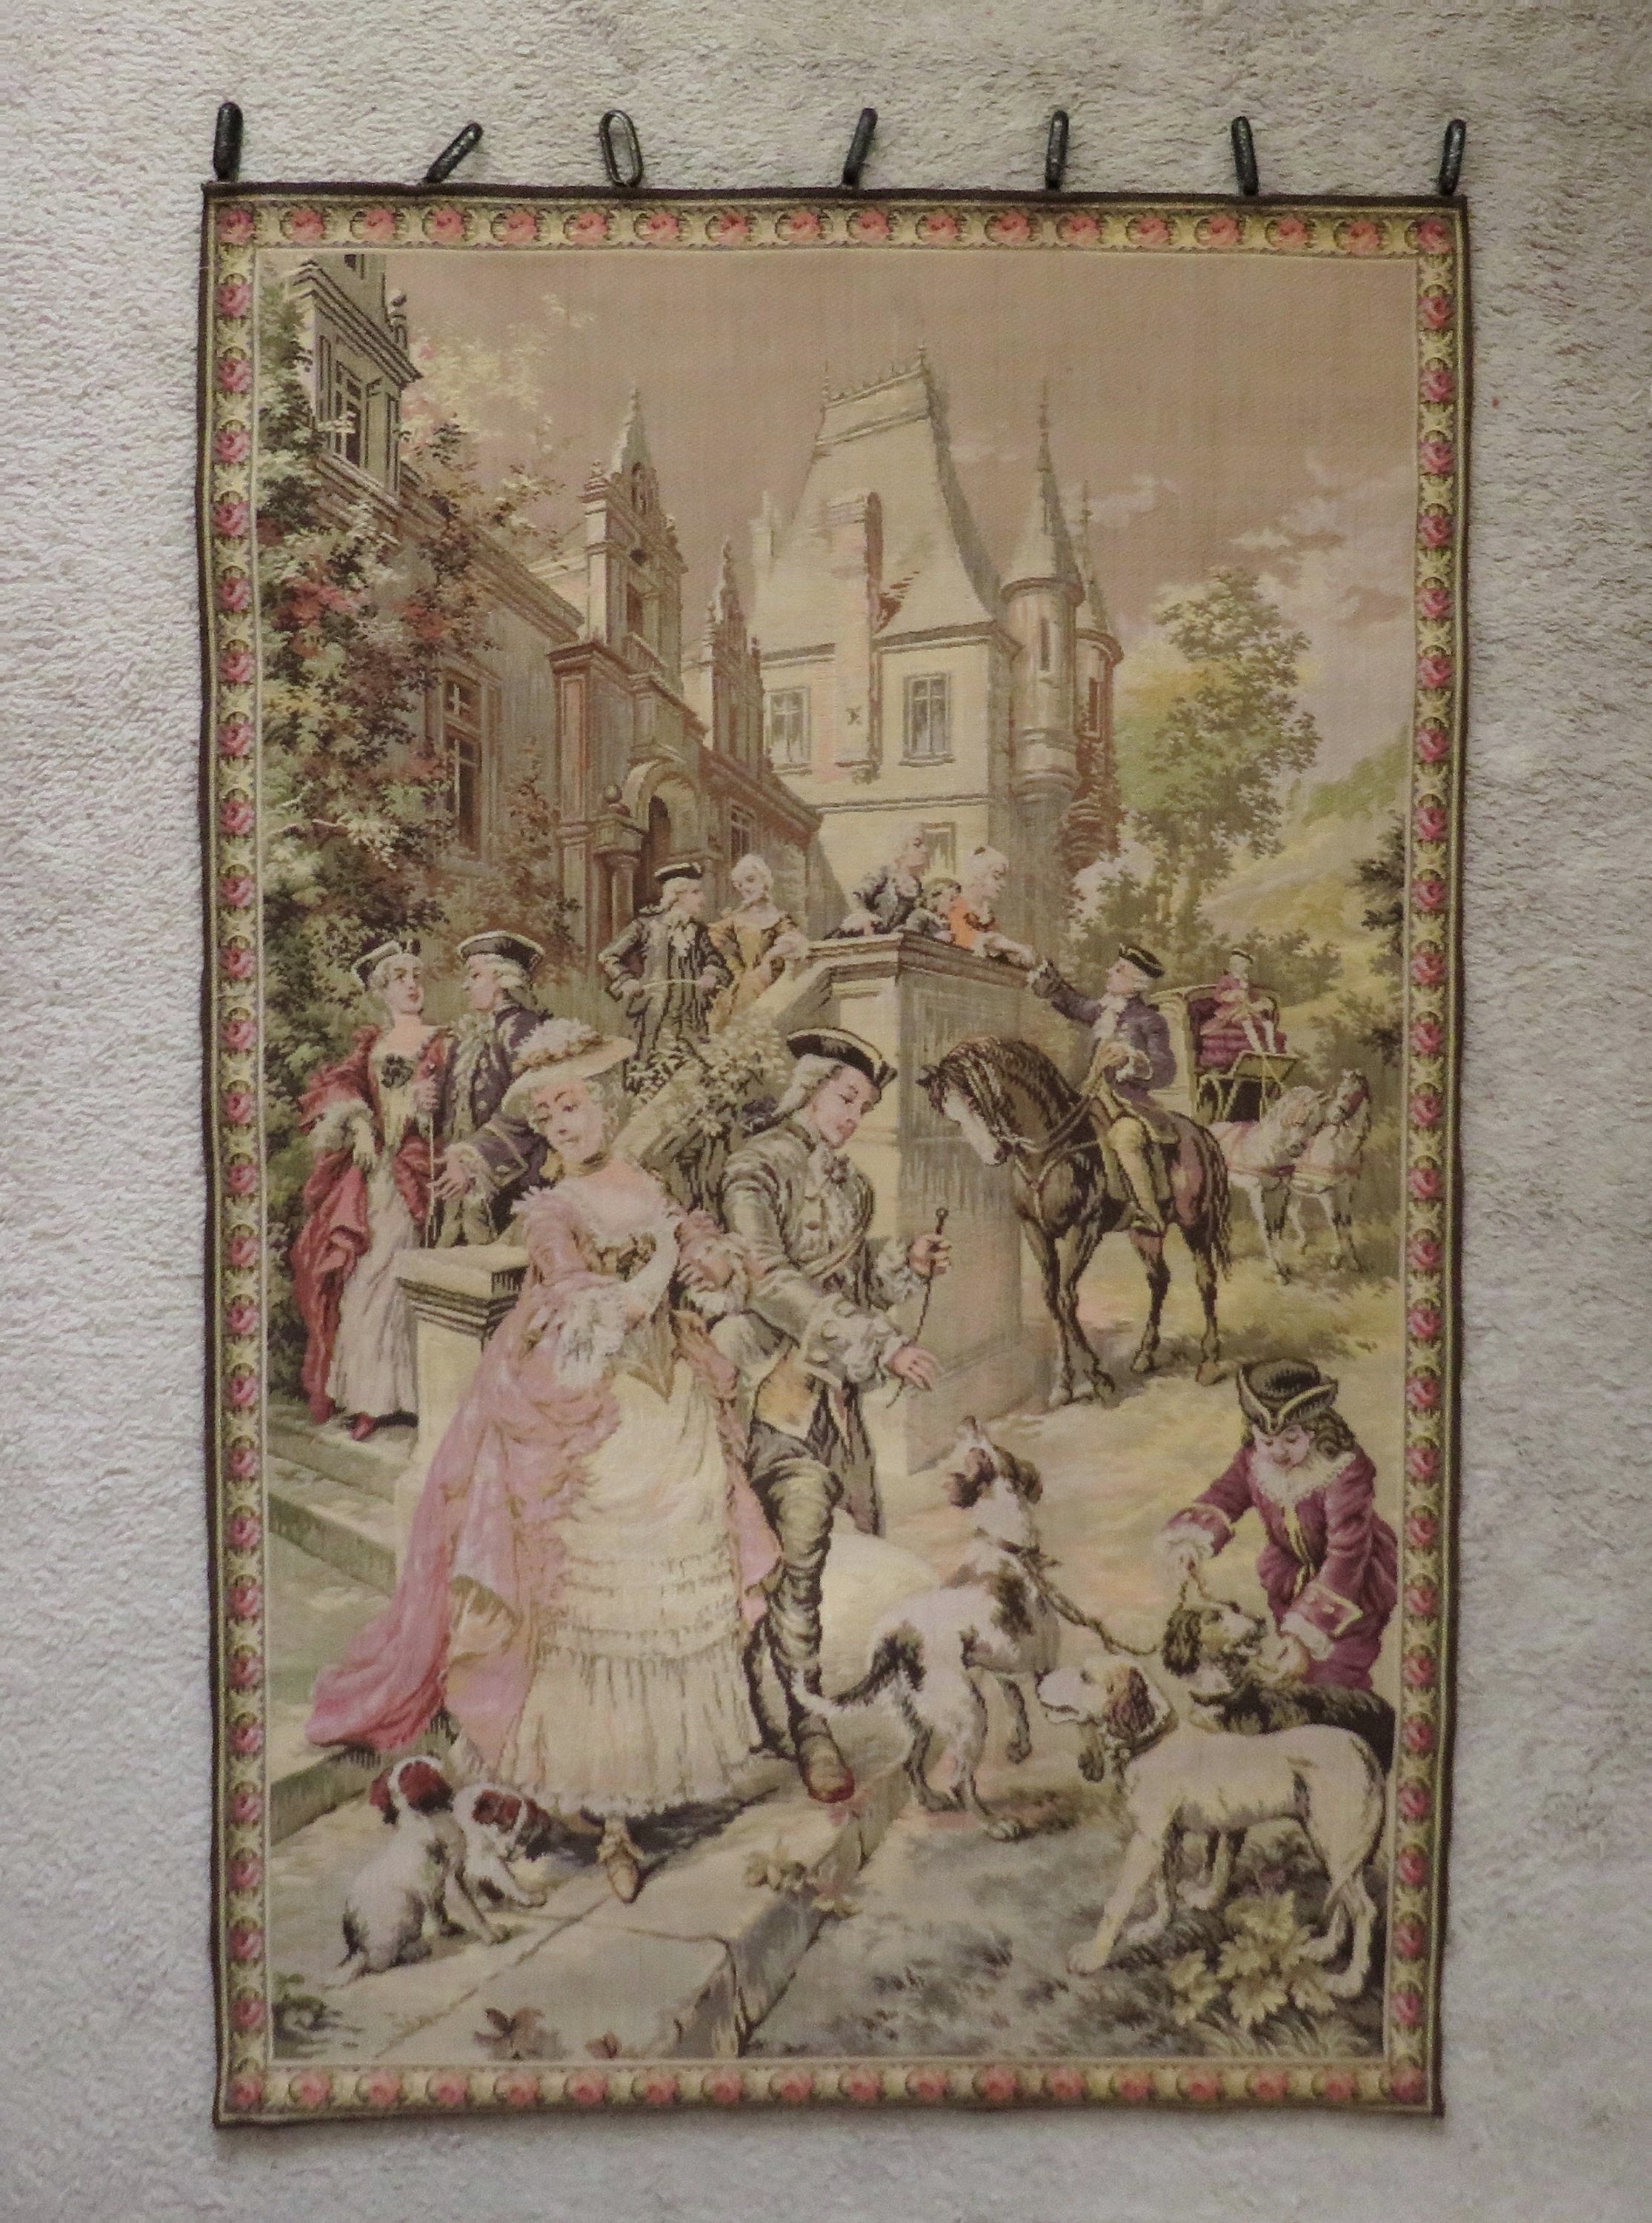 A190 Vintage French Beautiful Romantic Scene Wall hanging Tapestry 88X49cm 